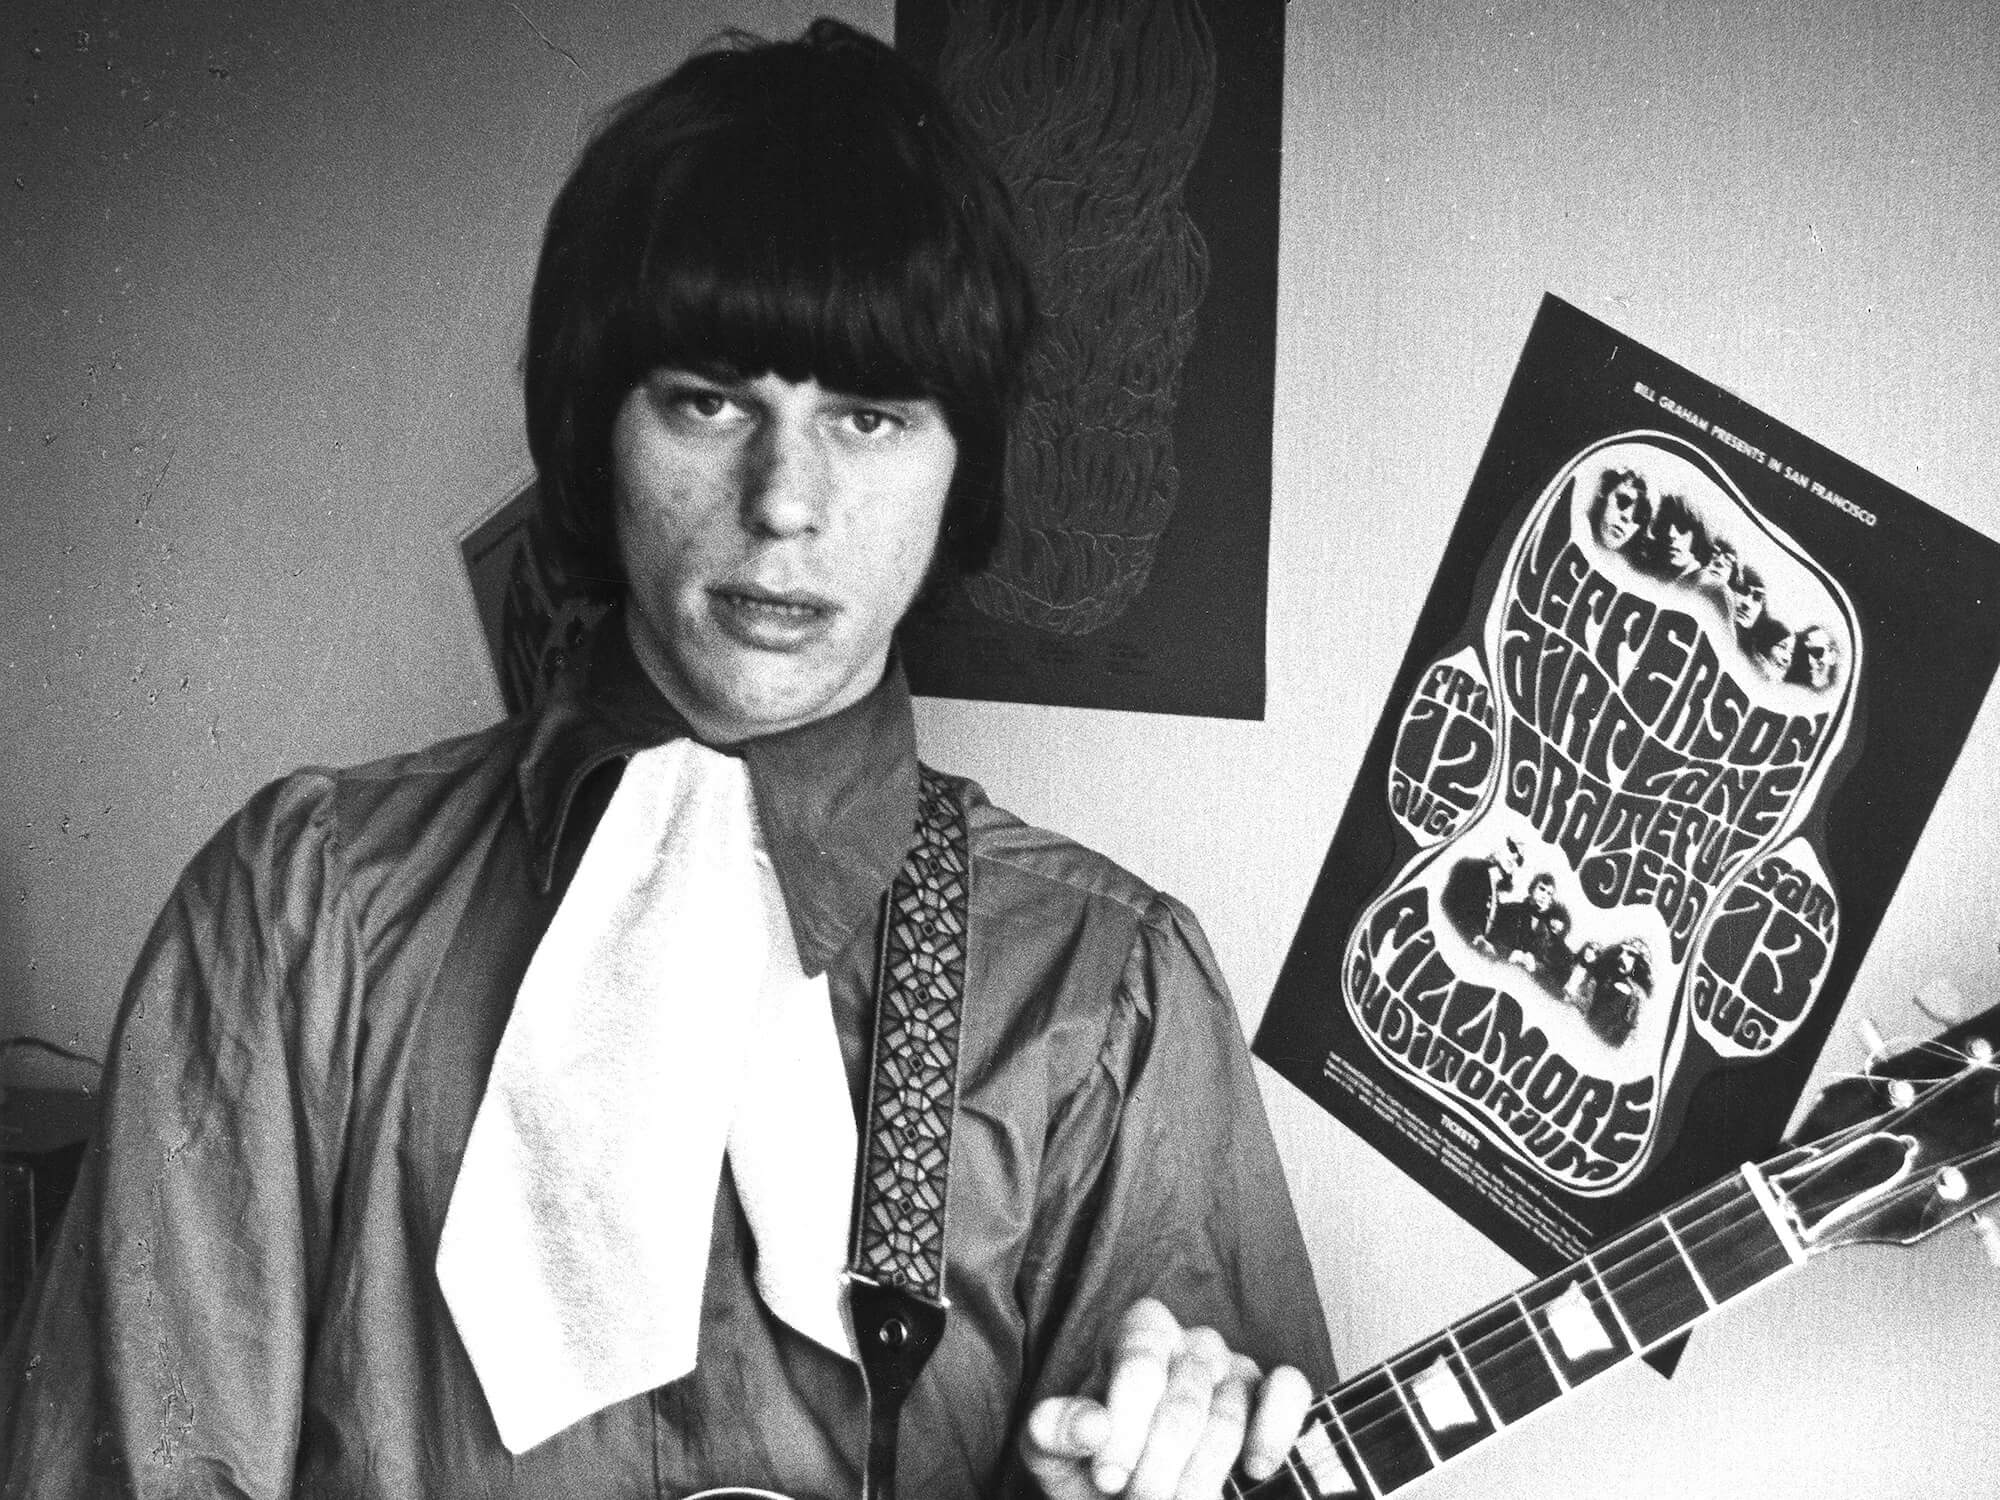 Jeff Beck at home circa 1965. Image by Val Wilmer/Redferns/Getty